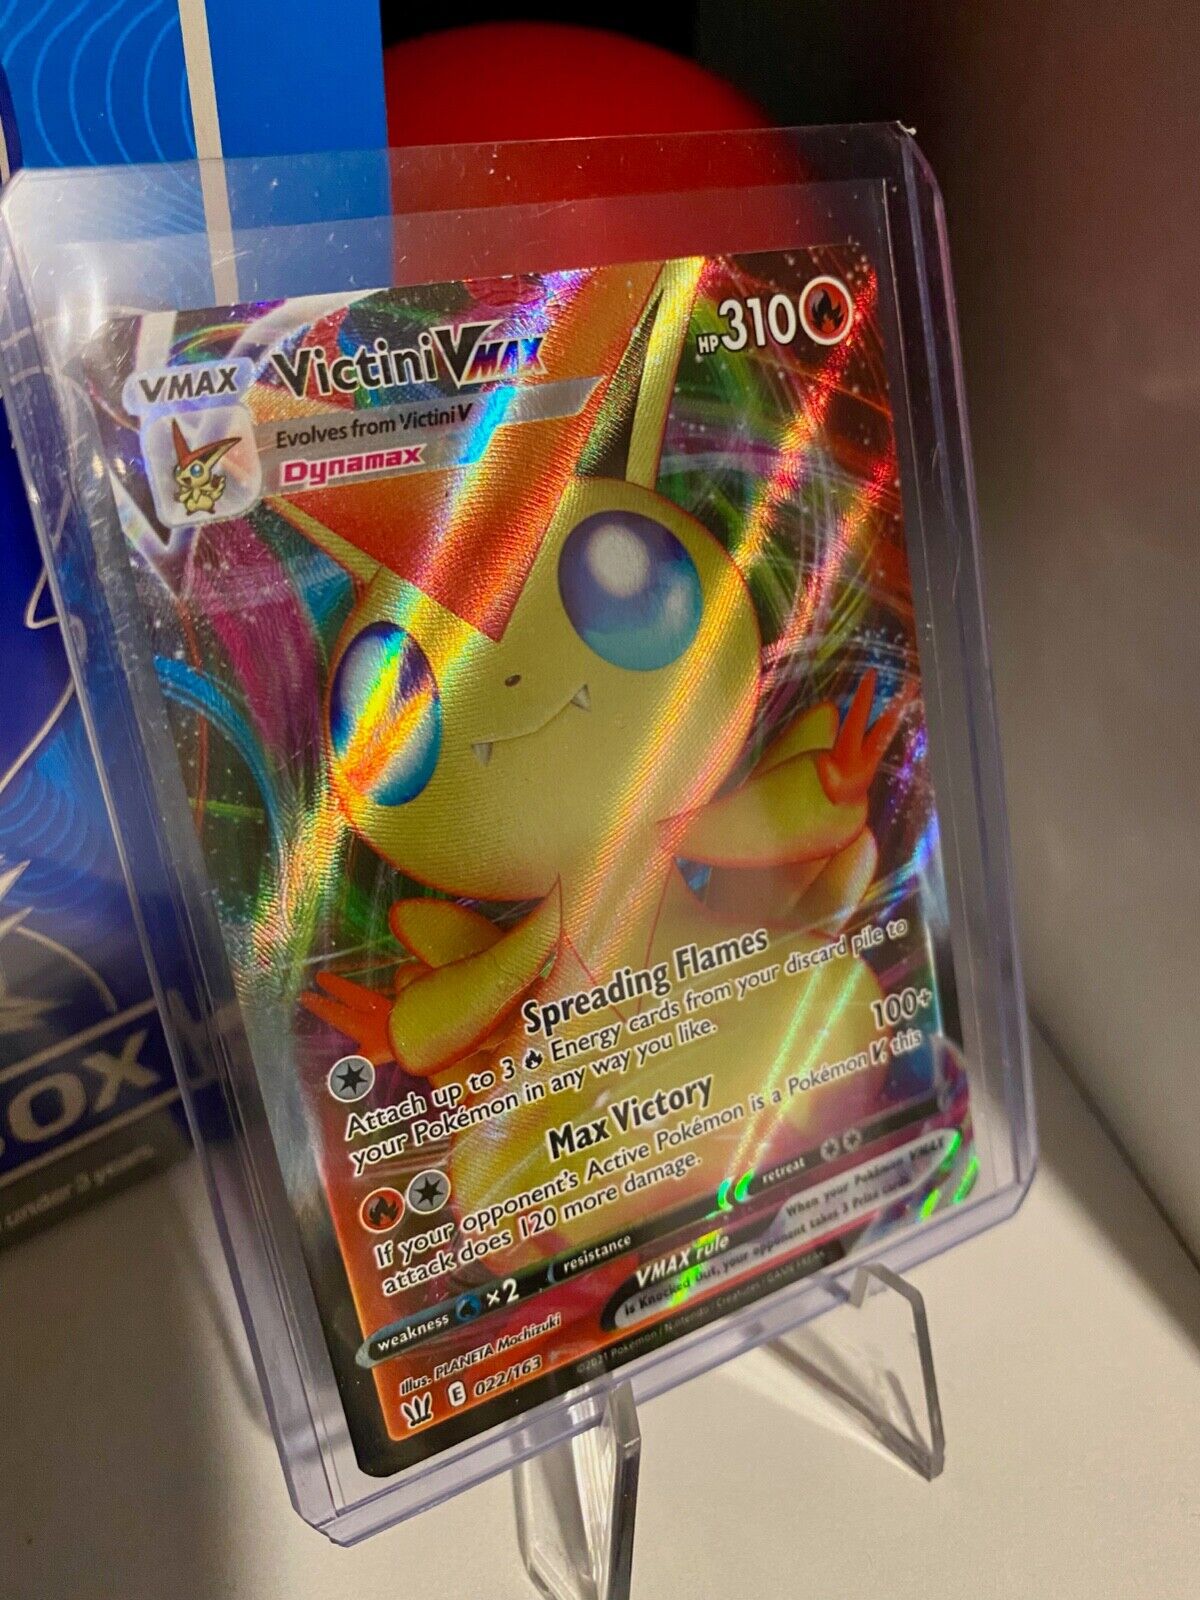 Details about   Victini VMAX Battle Styles 22/163 Near Mint Full Art Holo Rare